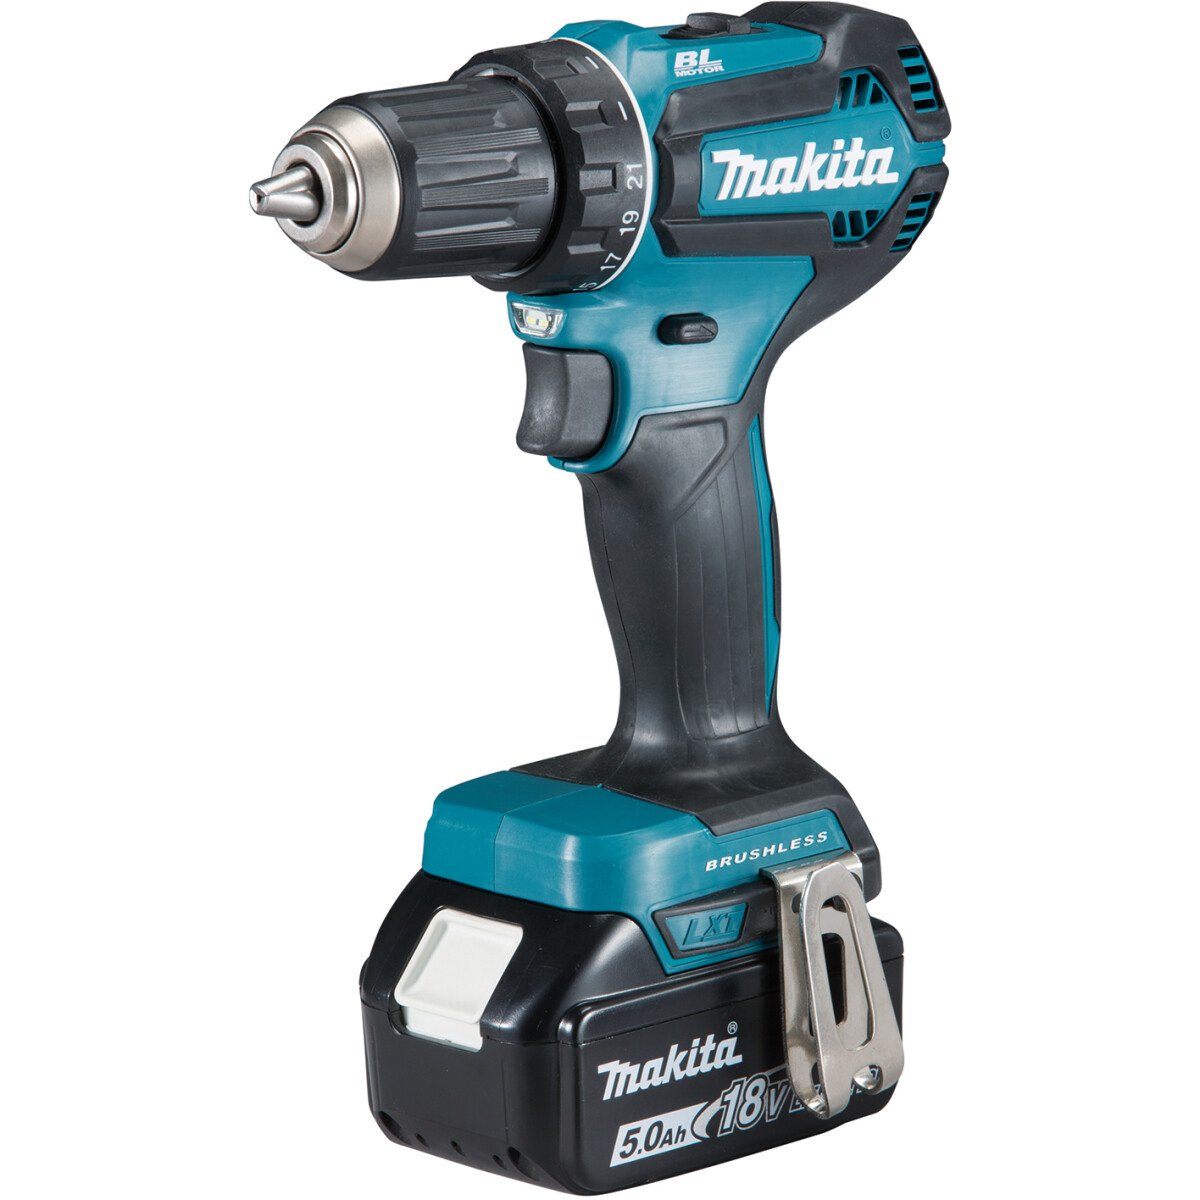 Makita DDF485RTJ 18V Brushless Drill/Driver with 2x 5.0Ah Batteries in MakPac Case